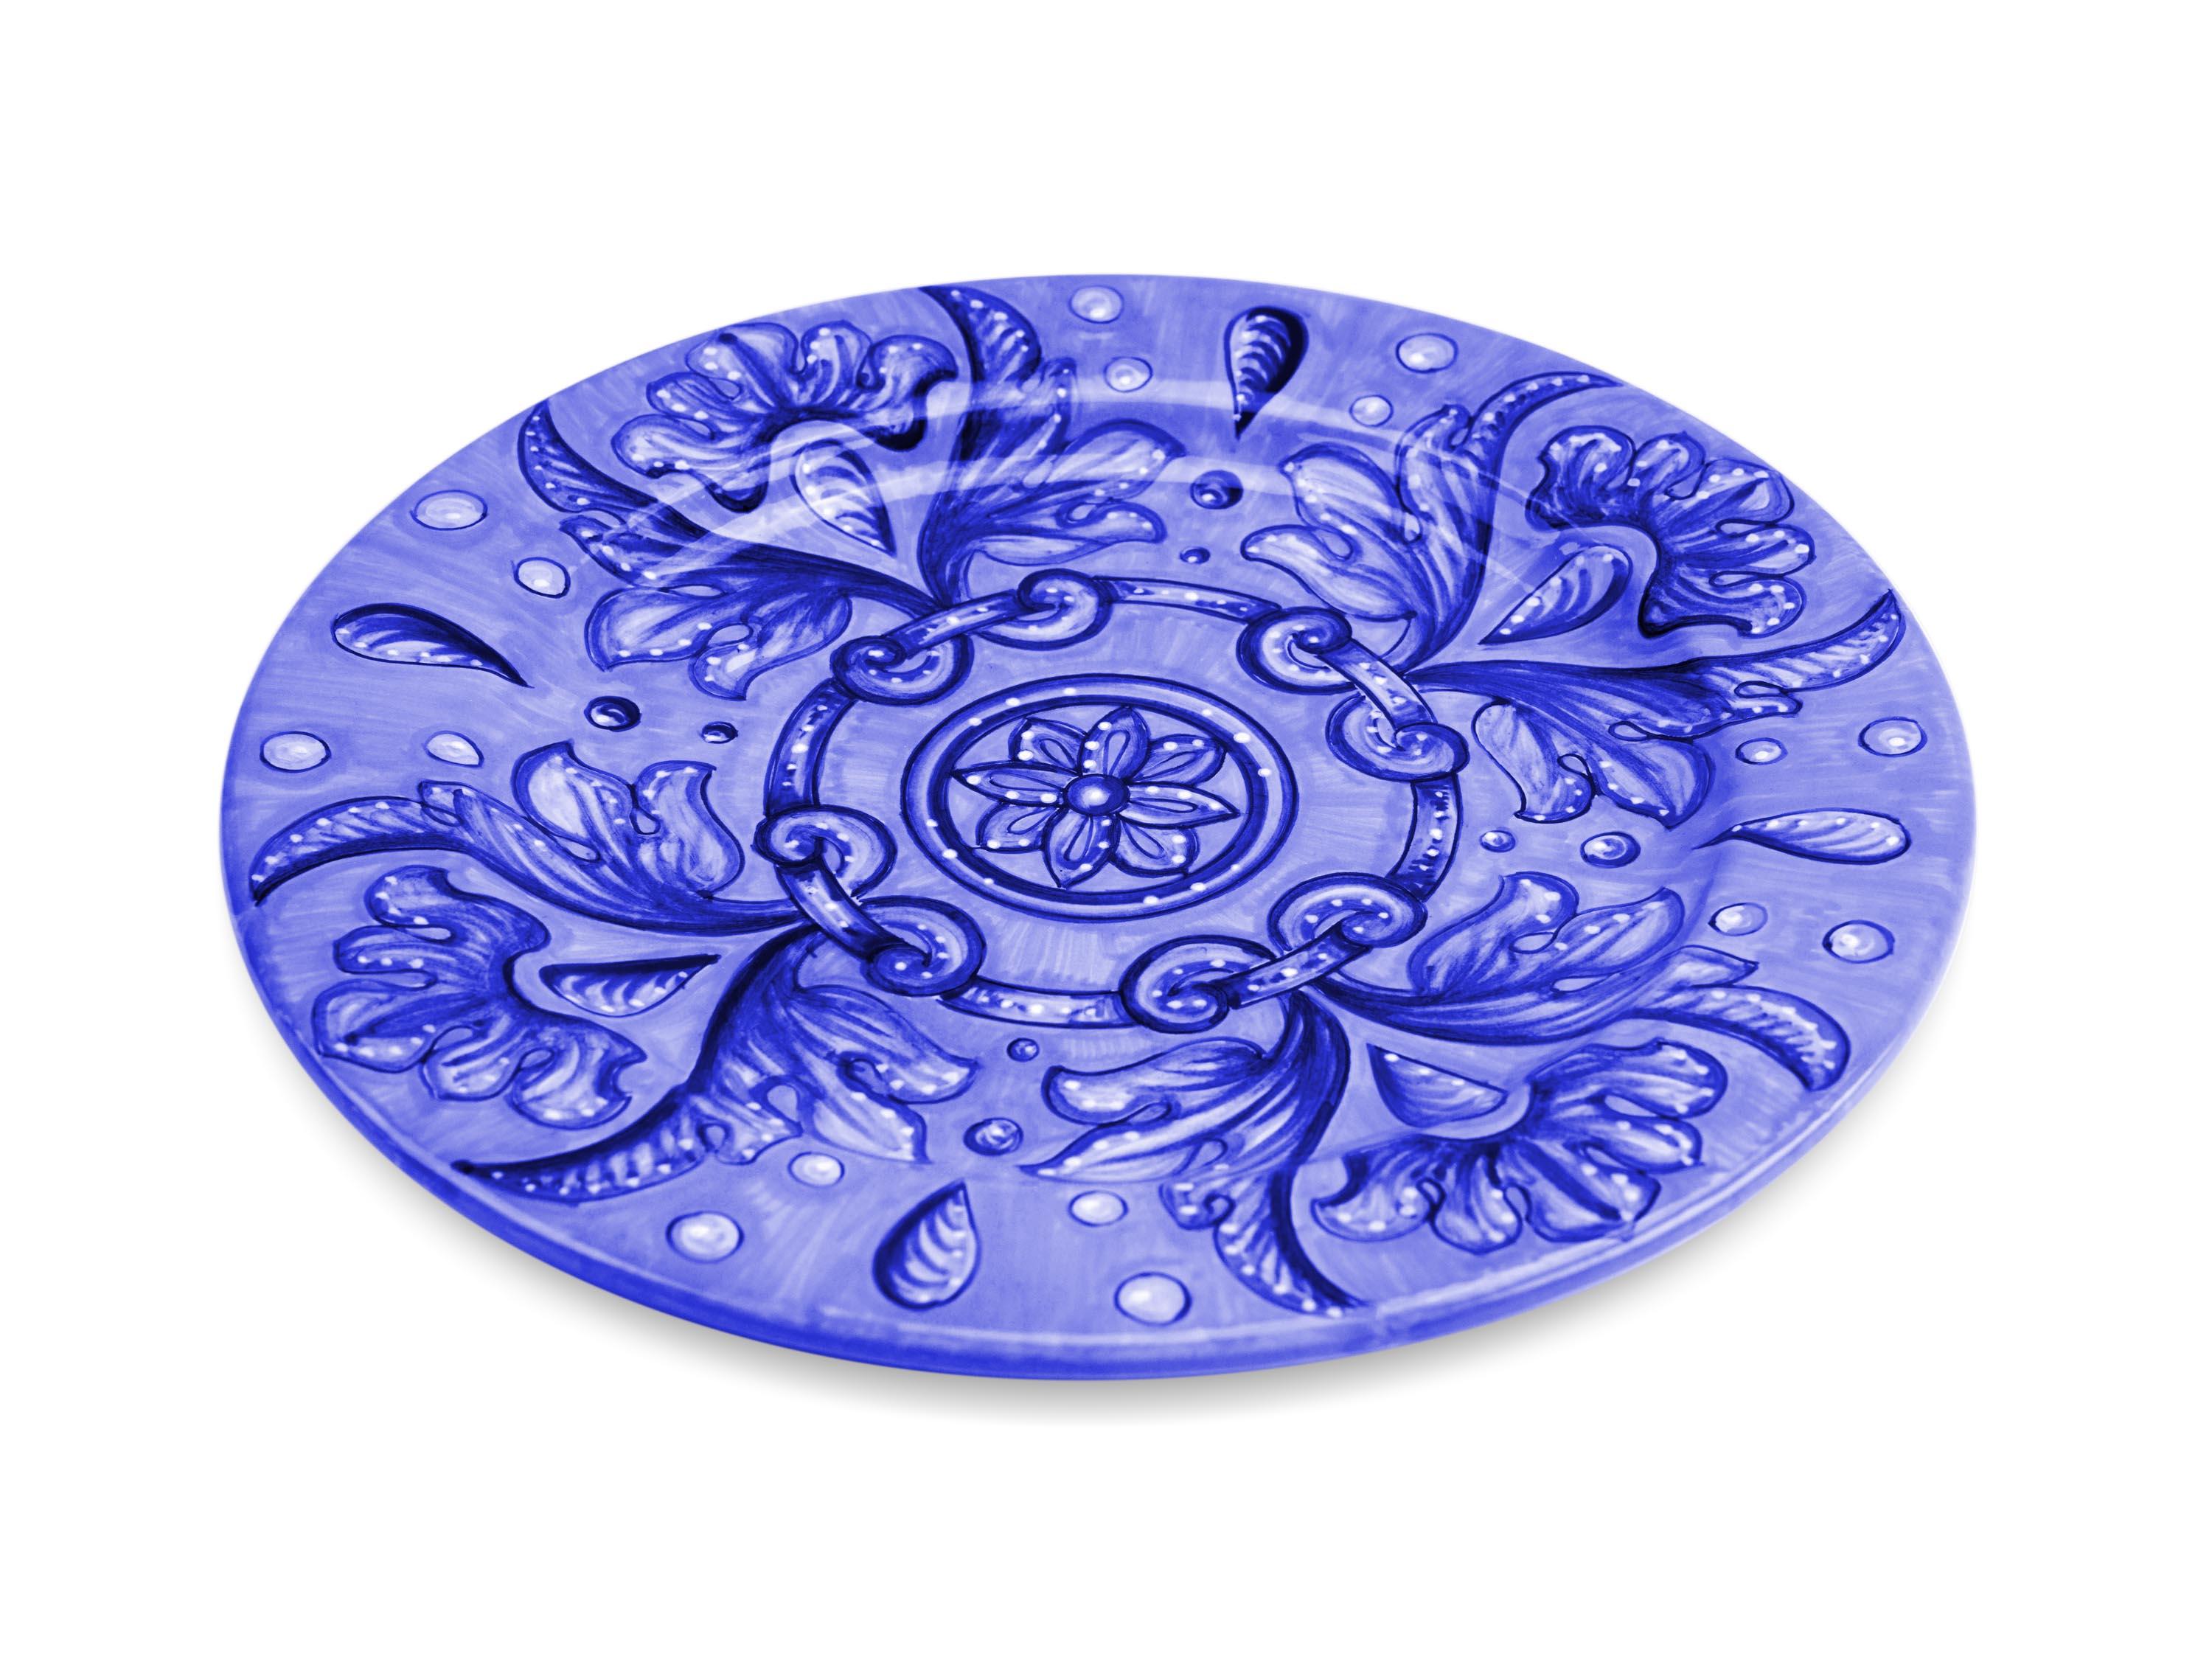 Modern Majolica Charger Plates Set Eight Dinner Plates Serveware Tableware Blue Painted